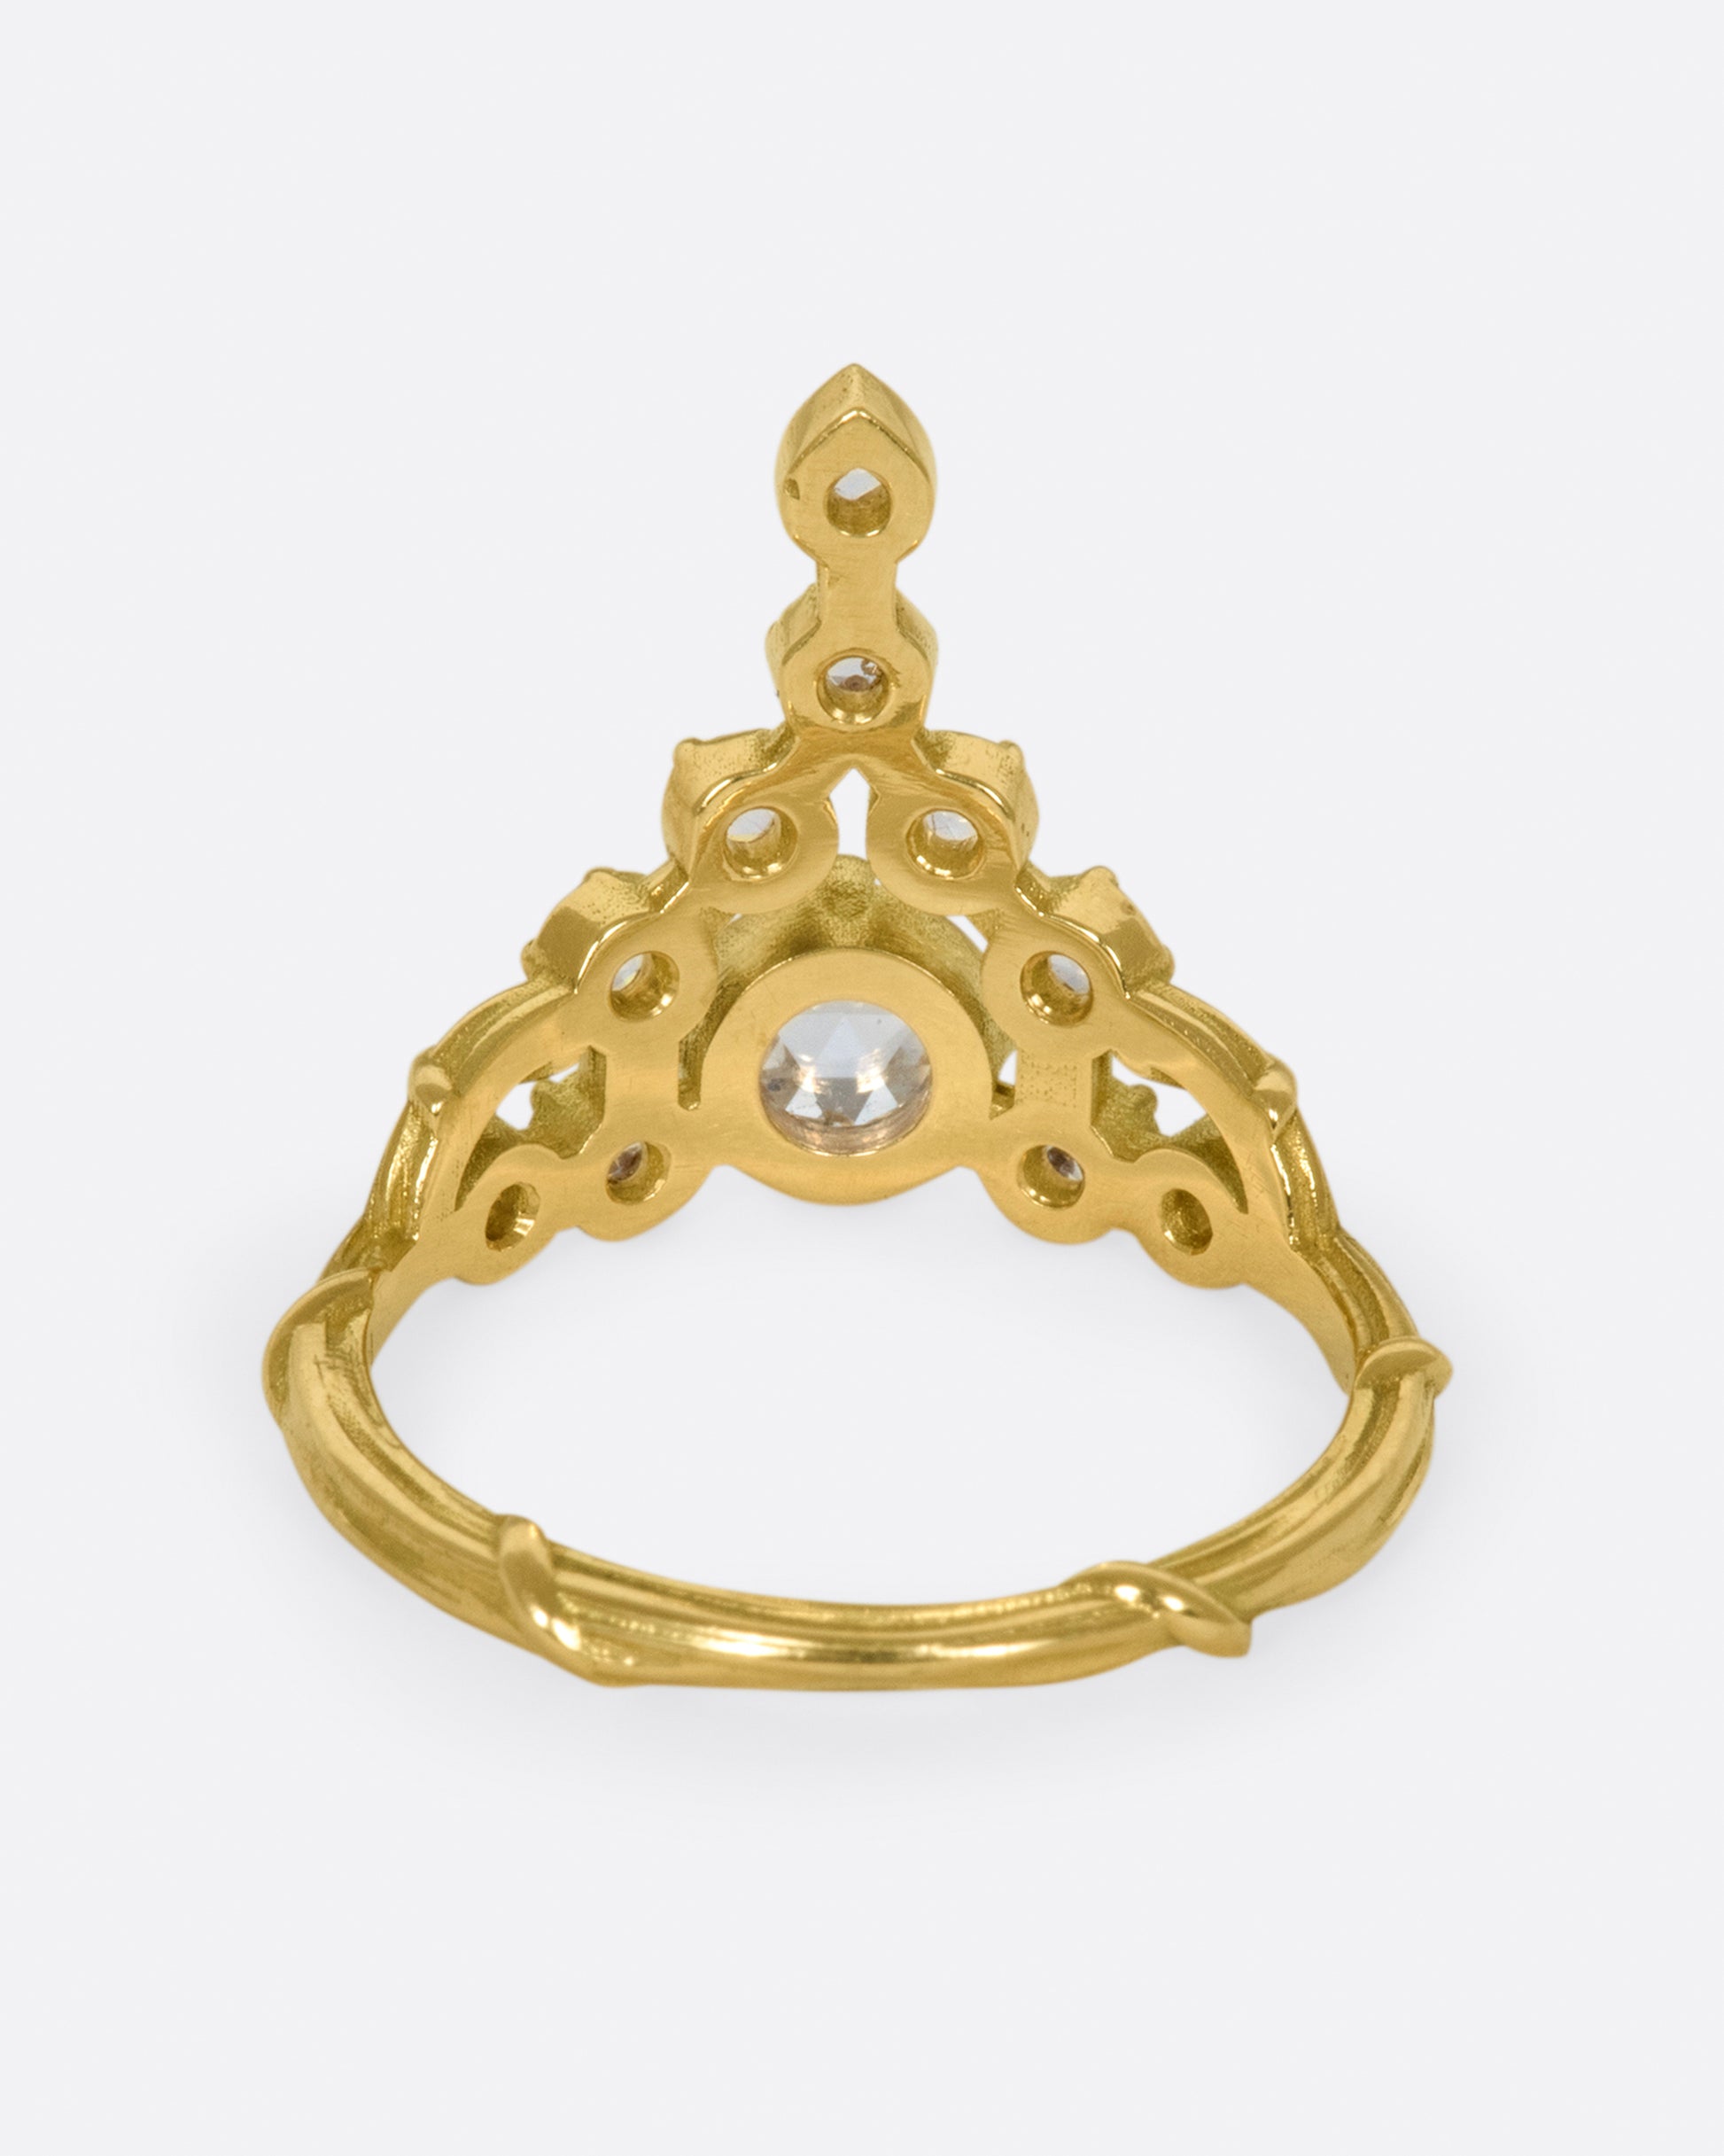 This ring makes a statement, but is also comfortable for everyday wear and is inspired by the ultimate power accessory, a tiara,